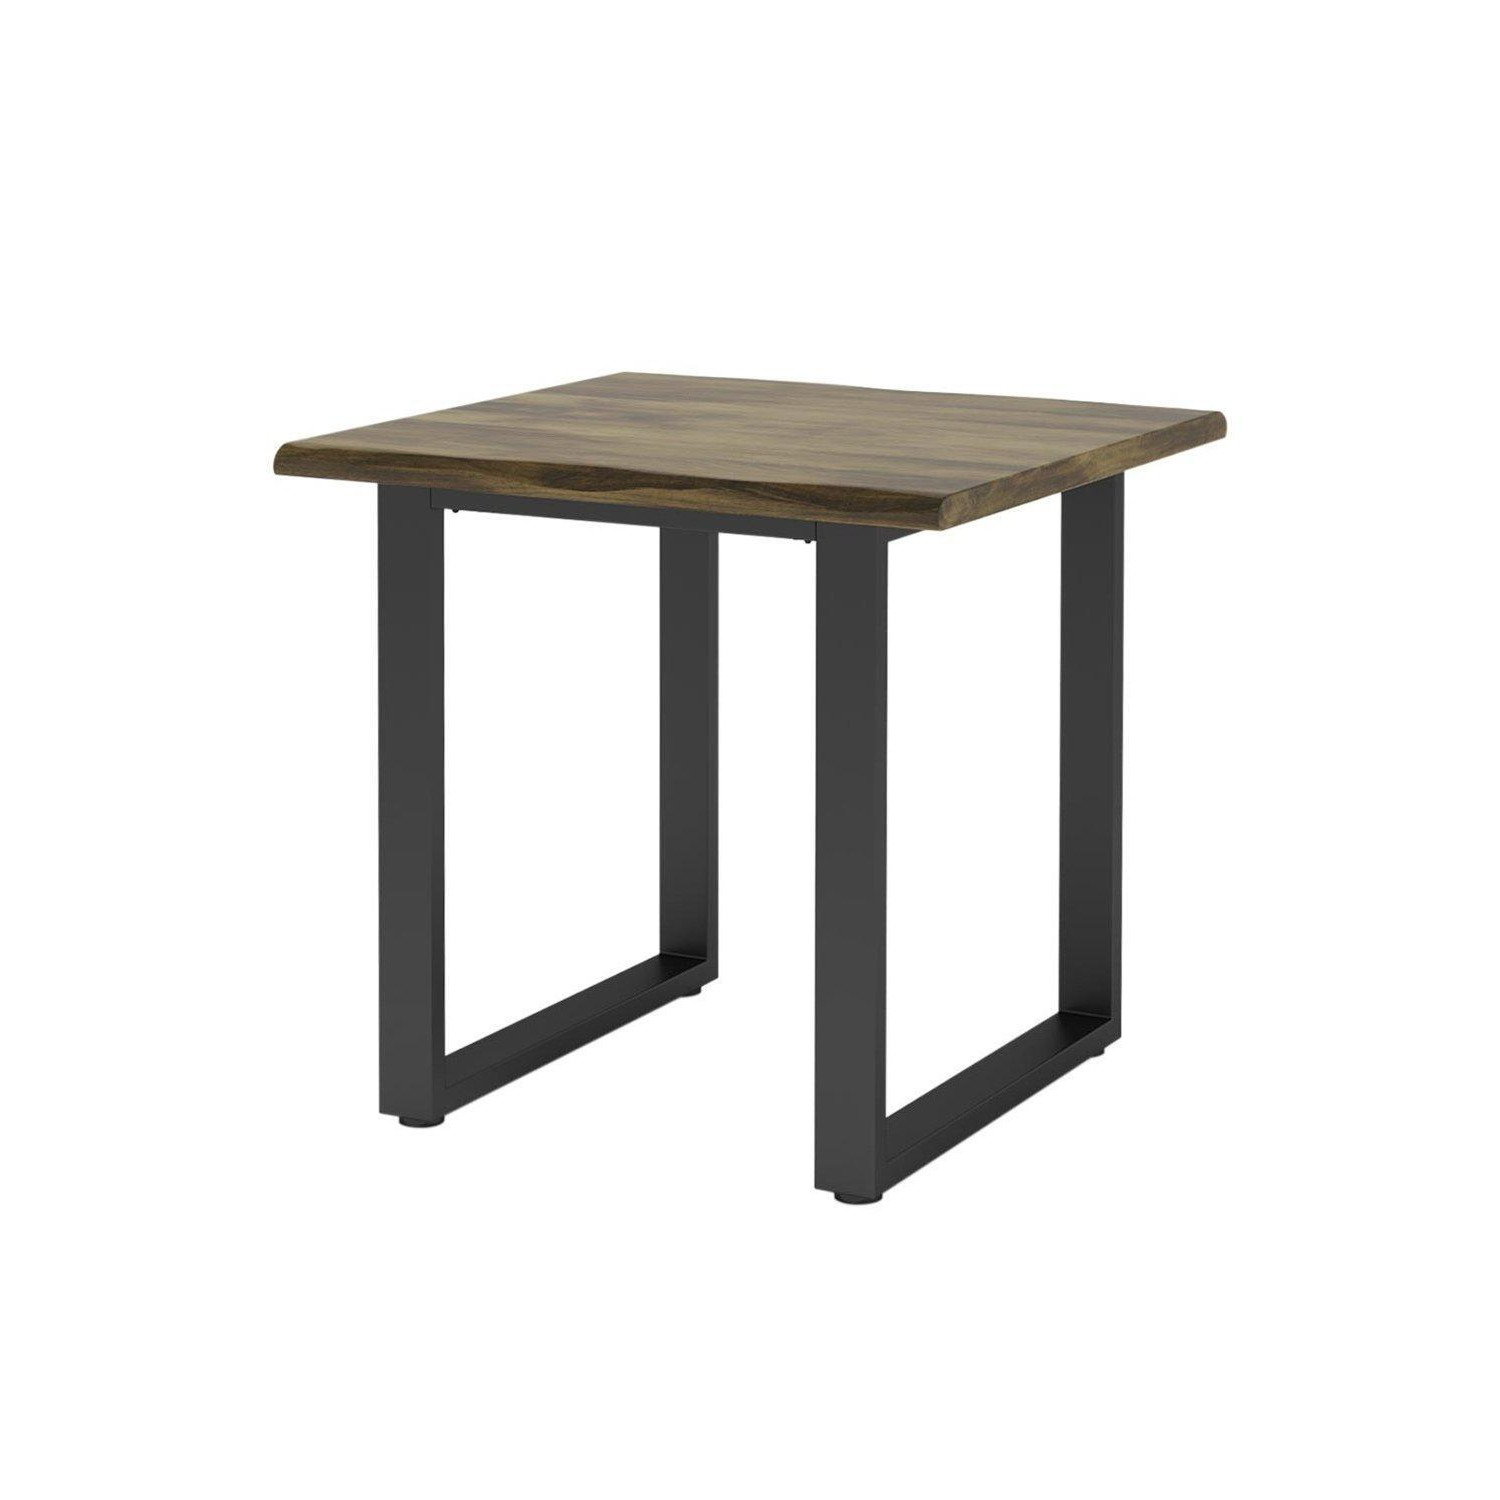 Solid Wood Rectangular Dining Table - image 1